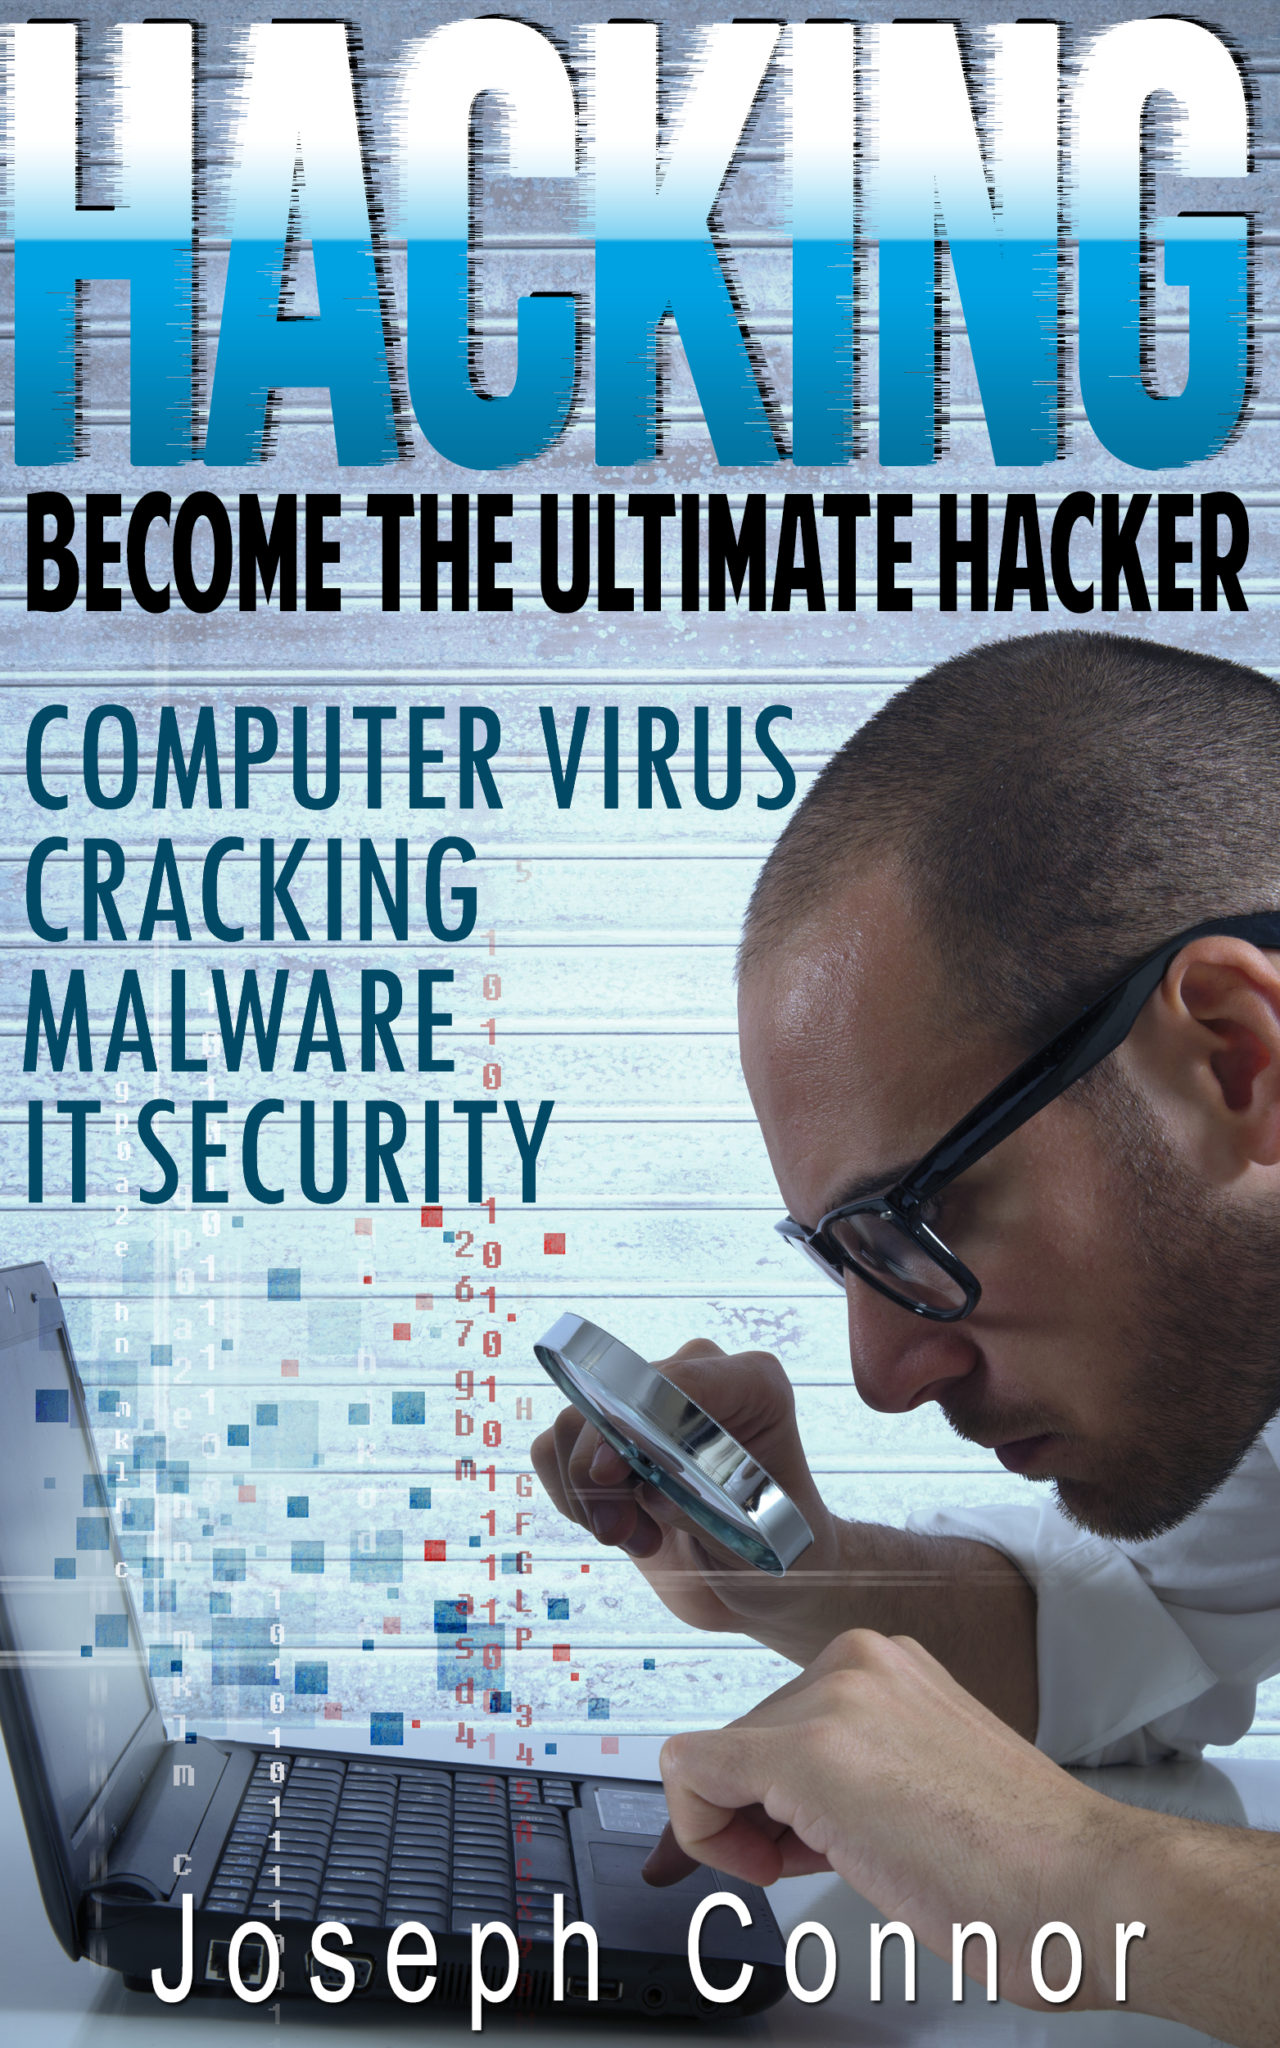 FREE: HACKING: Become The Ultimate Hacker – Computer Virus, Cracking, Malware, IT Security (Cyber Crime, Computer Hacking, How to Hack, Hacker, Computer Crime, Network Security, Software Security) by Joseph Connor